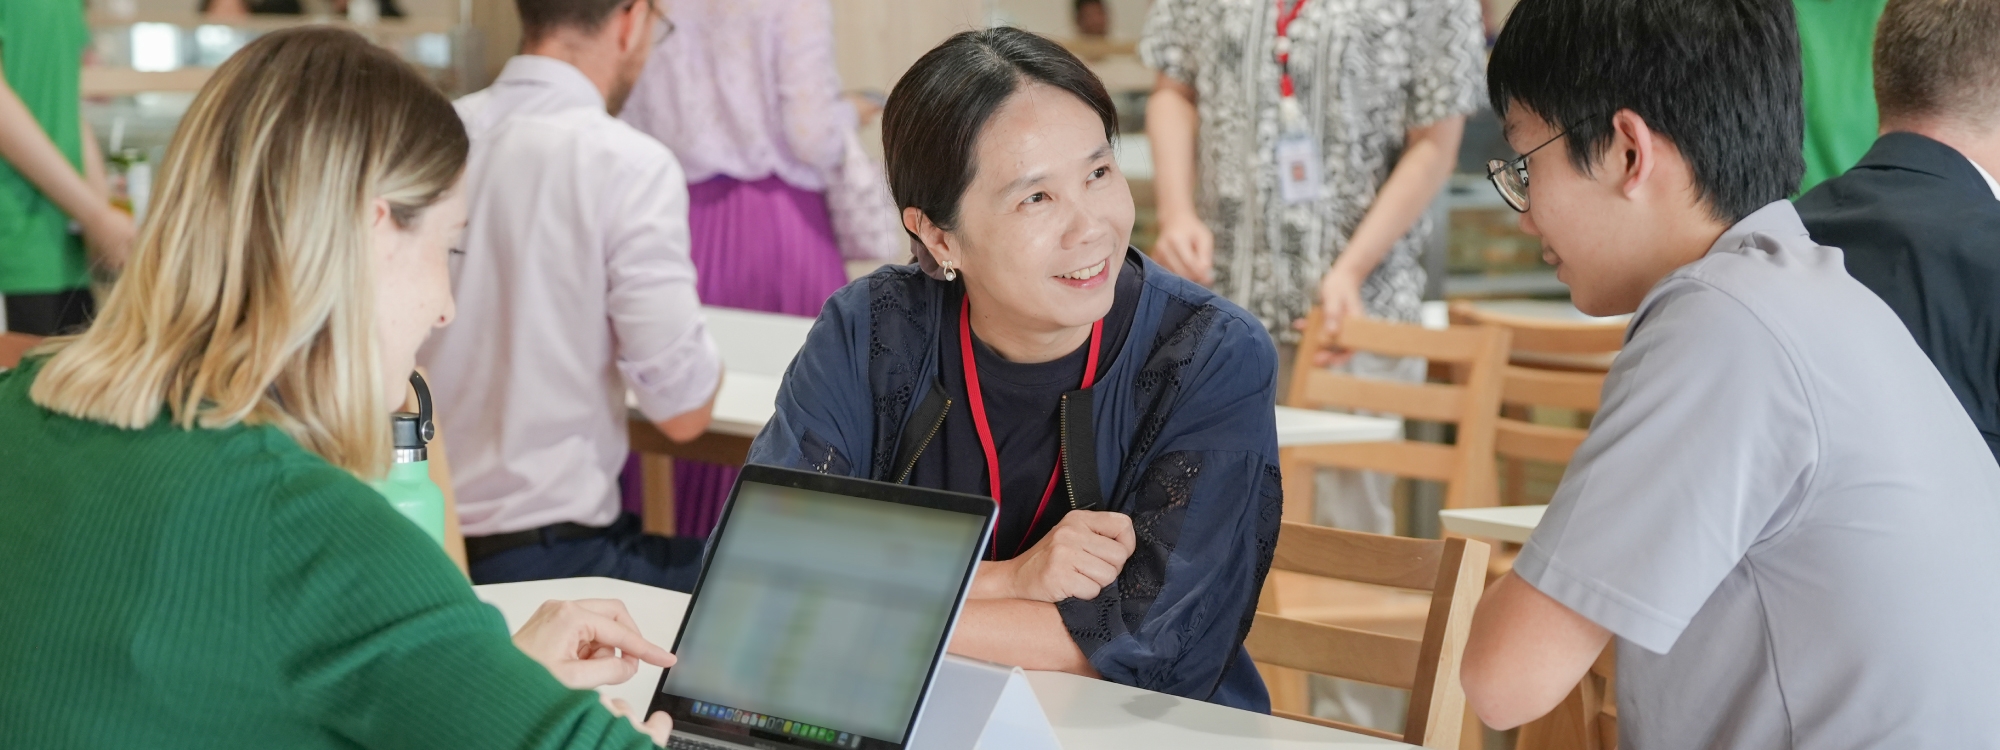 The close-knit collaboration in education at King’s Bangkok – Parent Teacher Student Conference